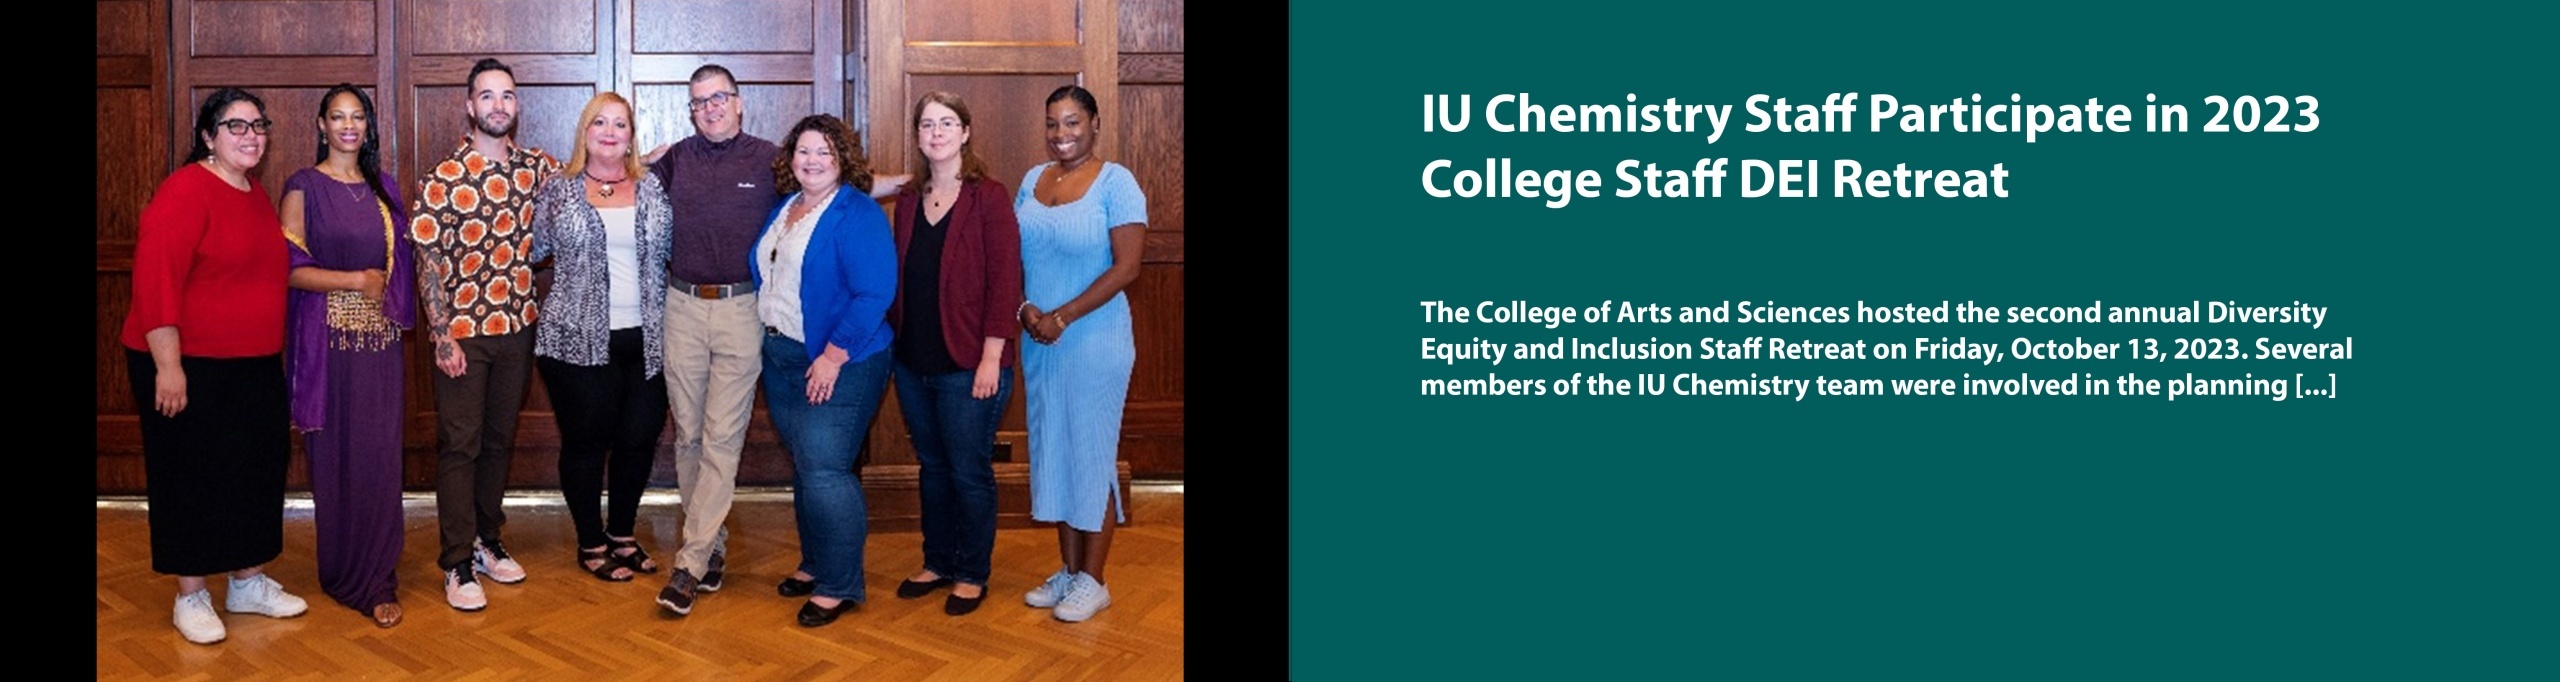 Lisa Burchenson from IU Chemistry (4th from left) with others on the retreat planning committee.